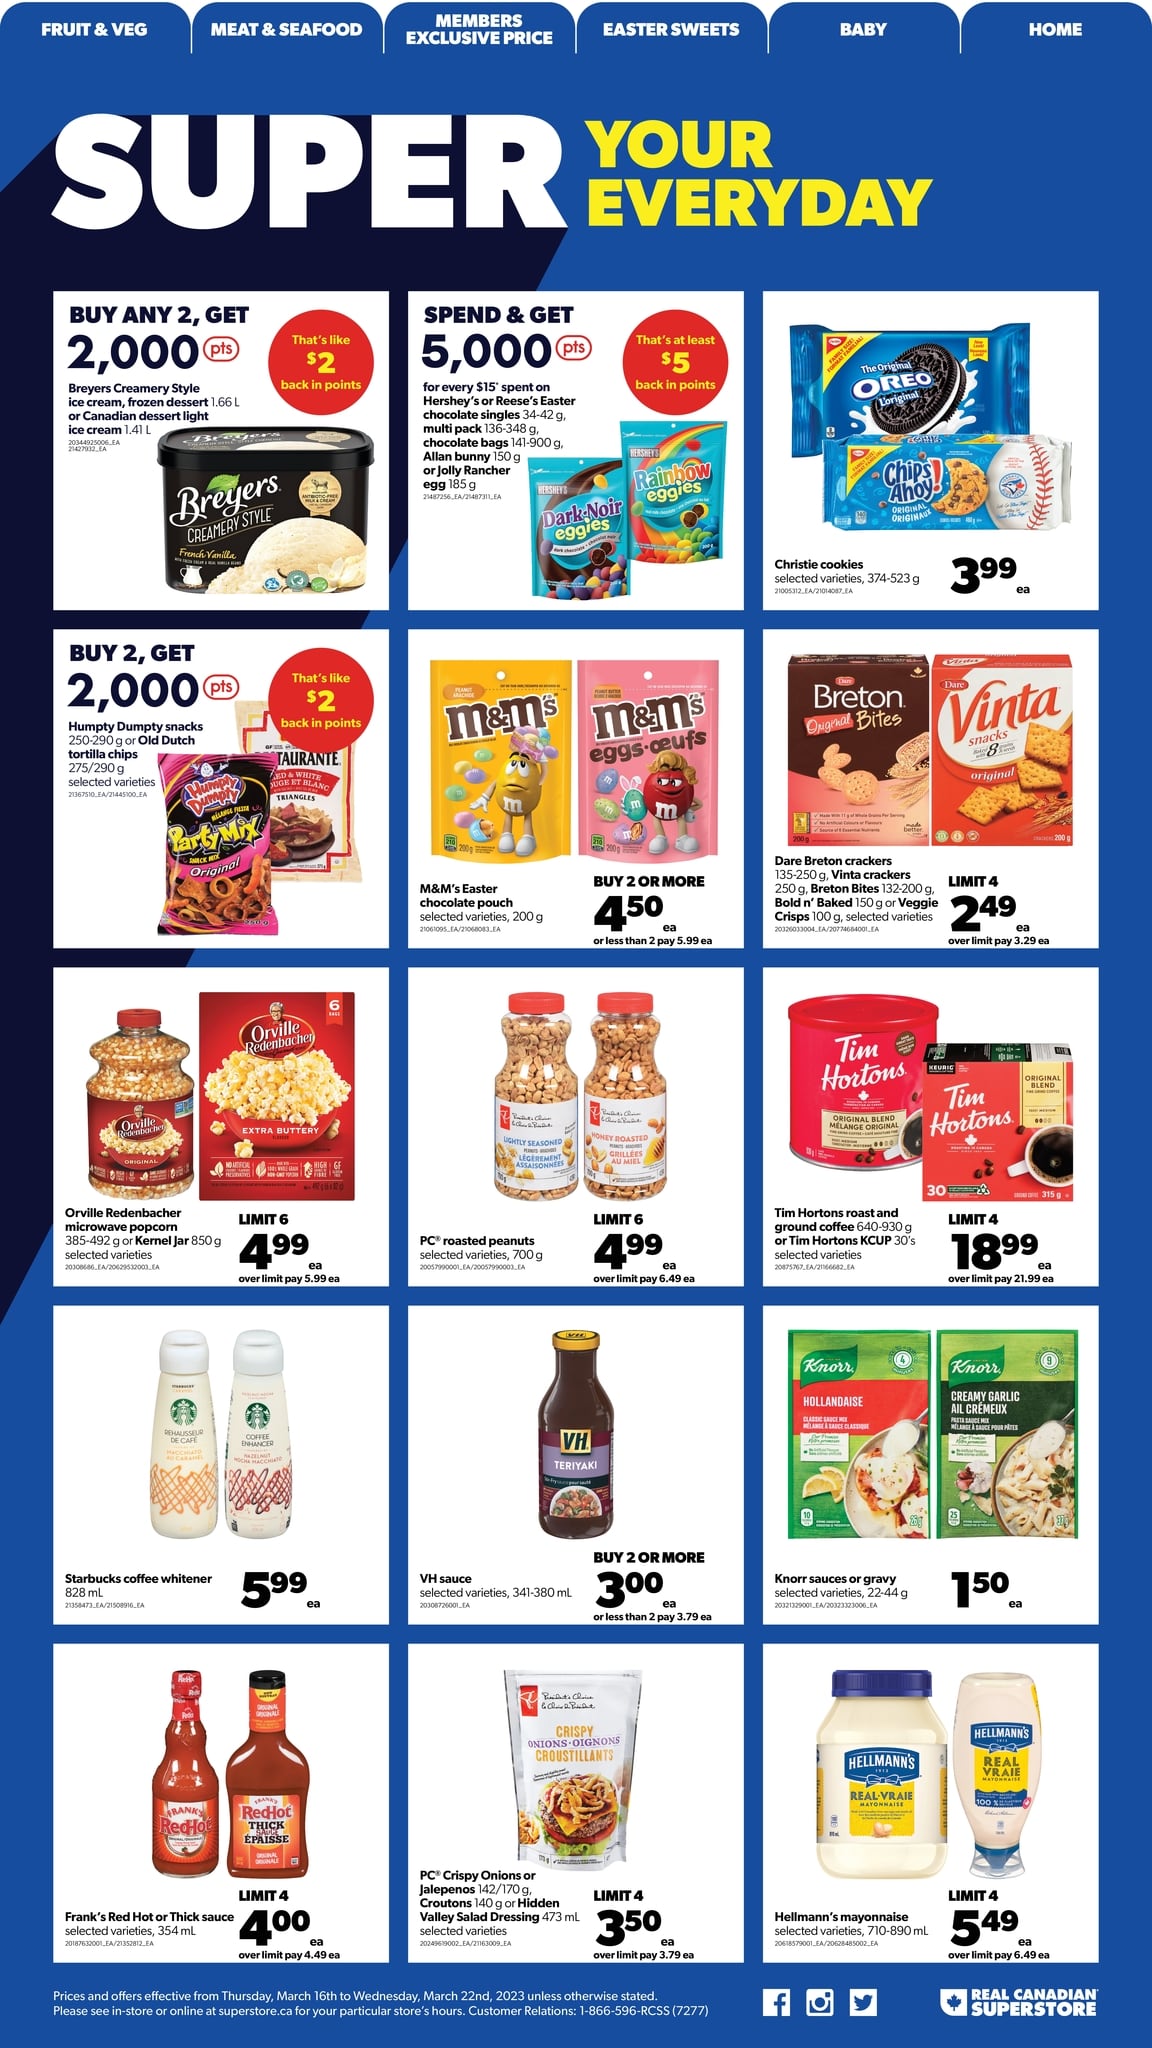 Real Canadian Superstore - Ontario - Weekly Flyer Specials - Page 11